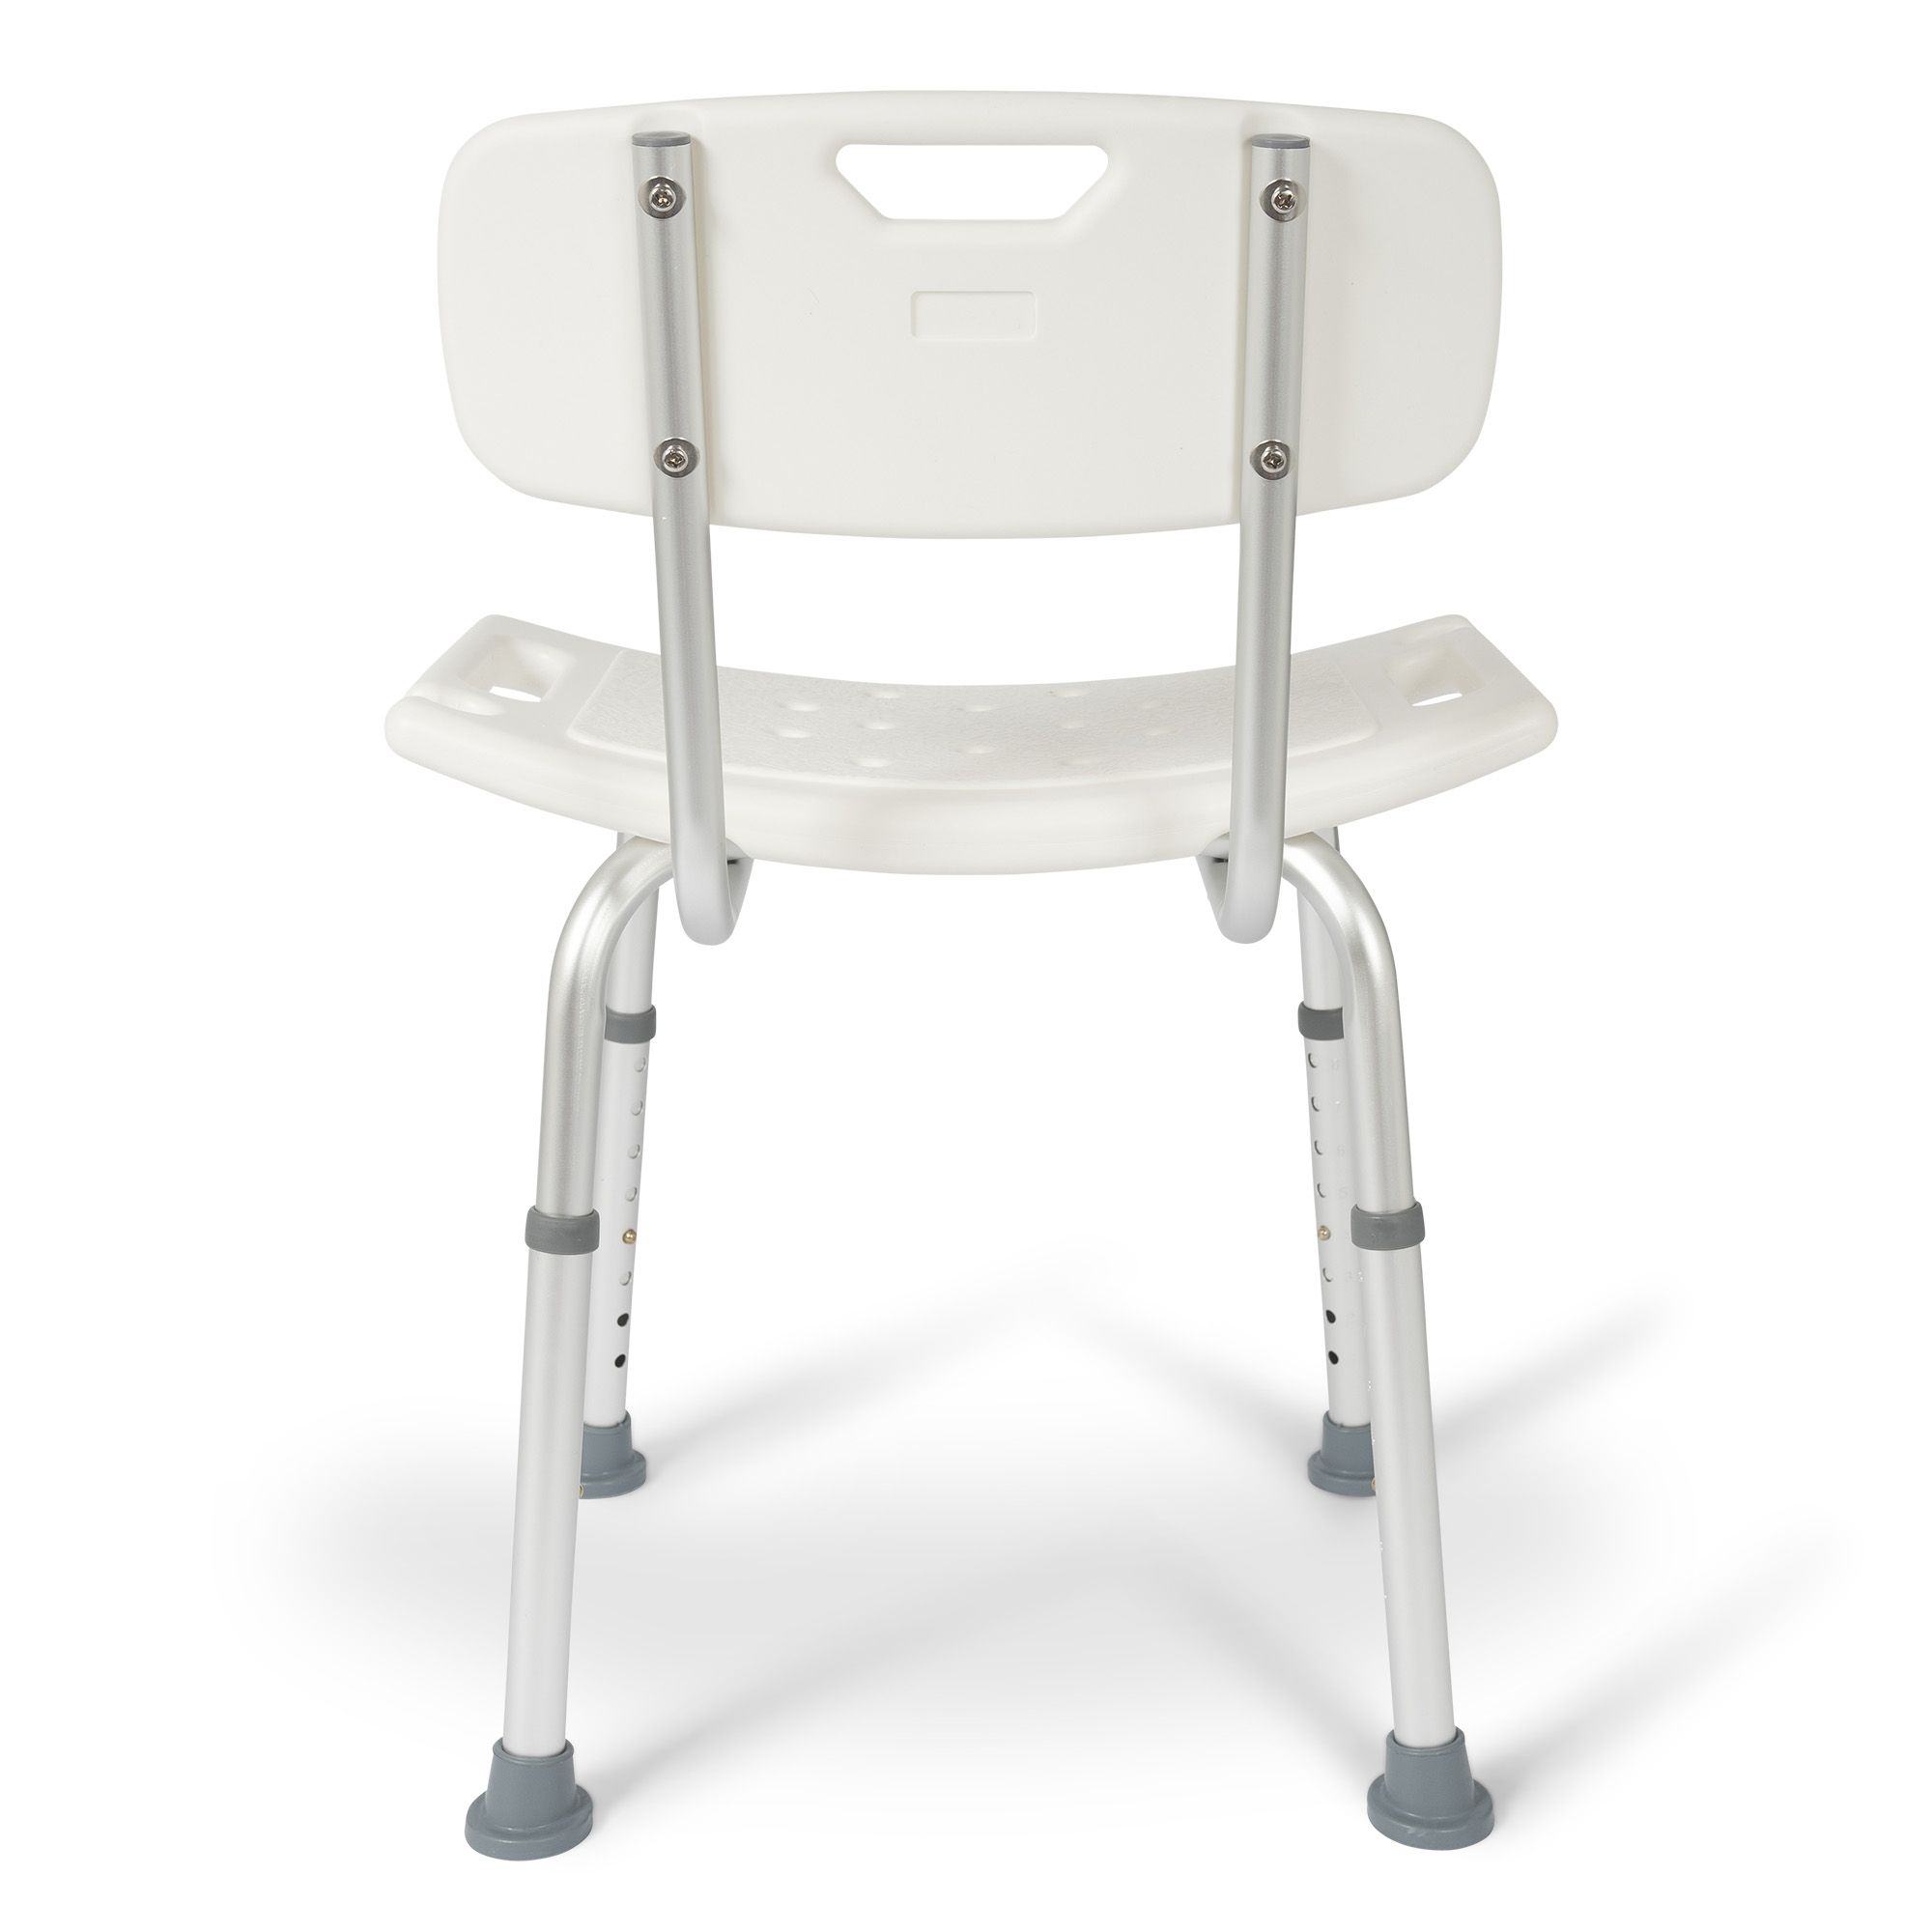 dunimed shower chair with backrest zoomed in